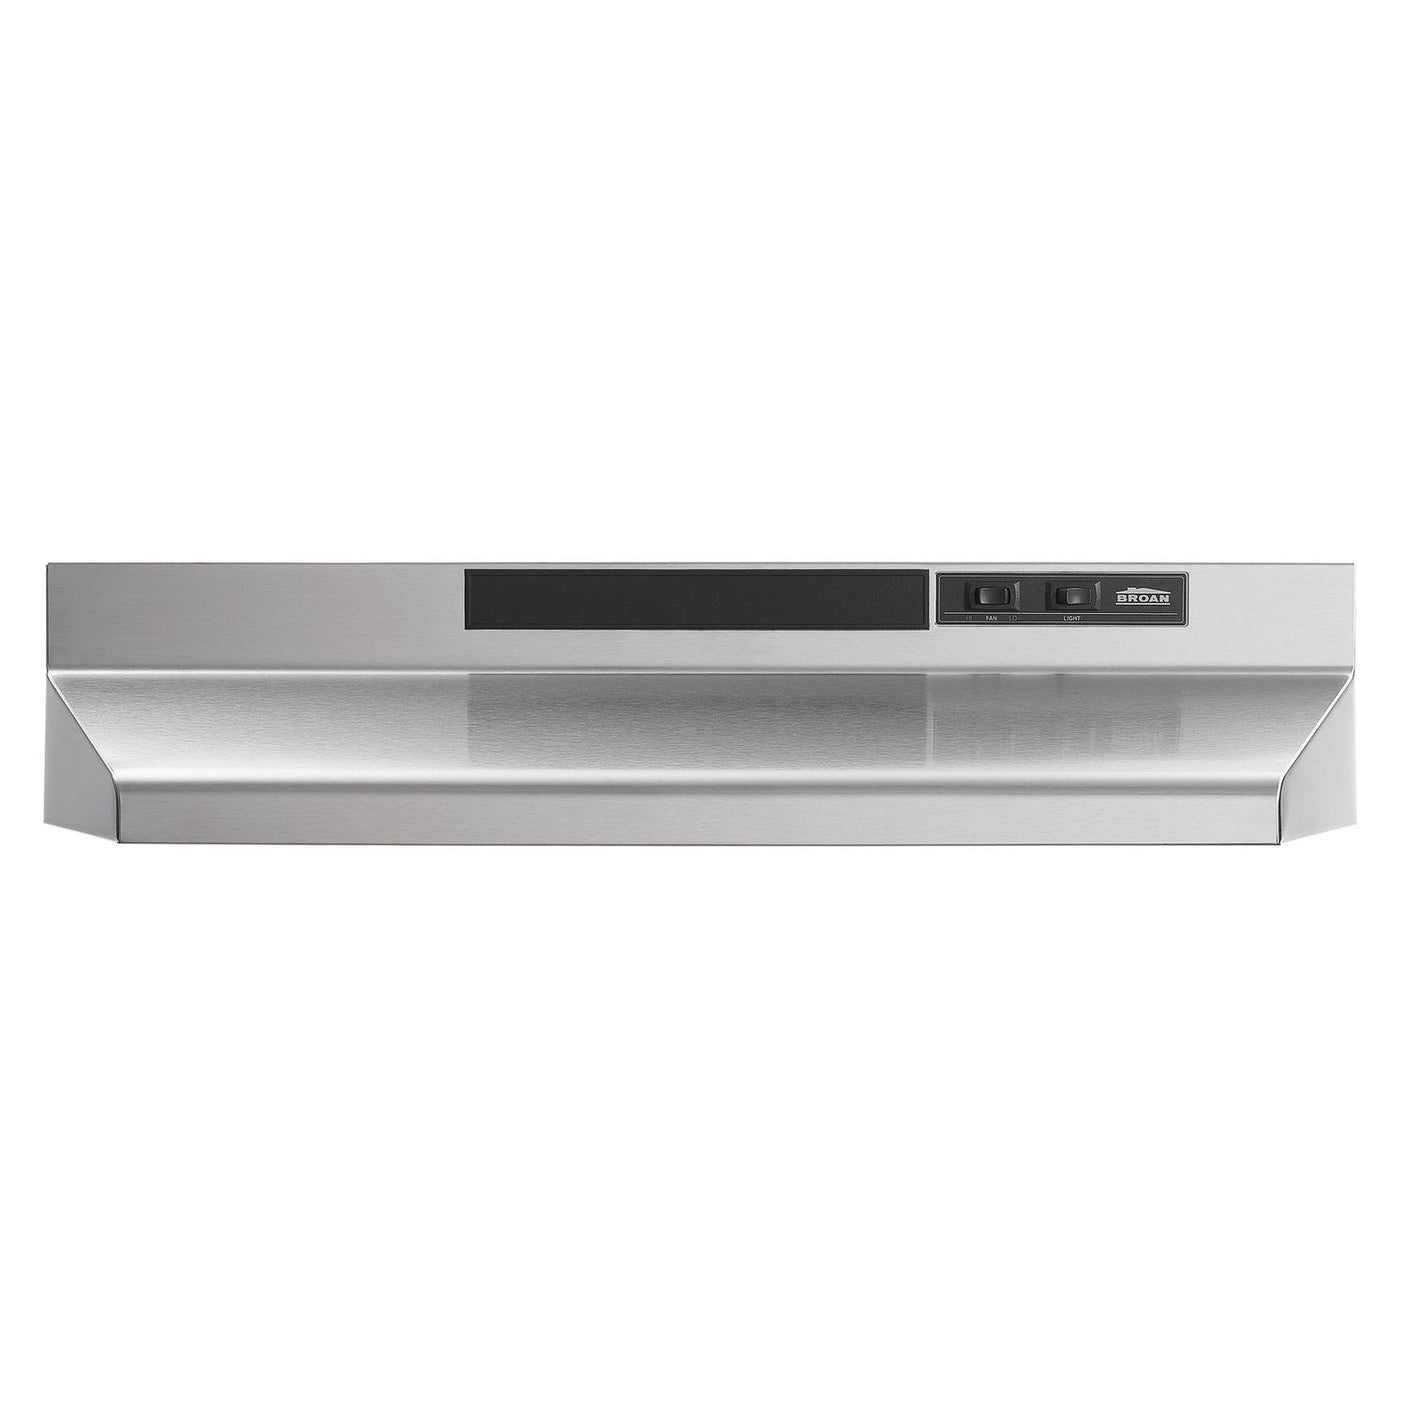 **DISCONTINUED** Broan® 36-Inch Convertible Under-Cabinet Range Hood, Stainless Steel